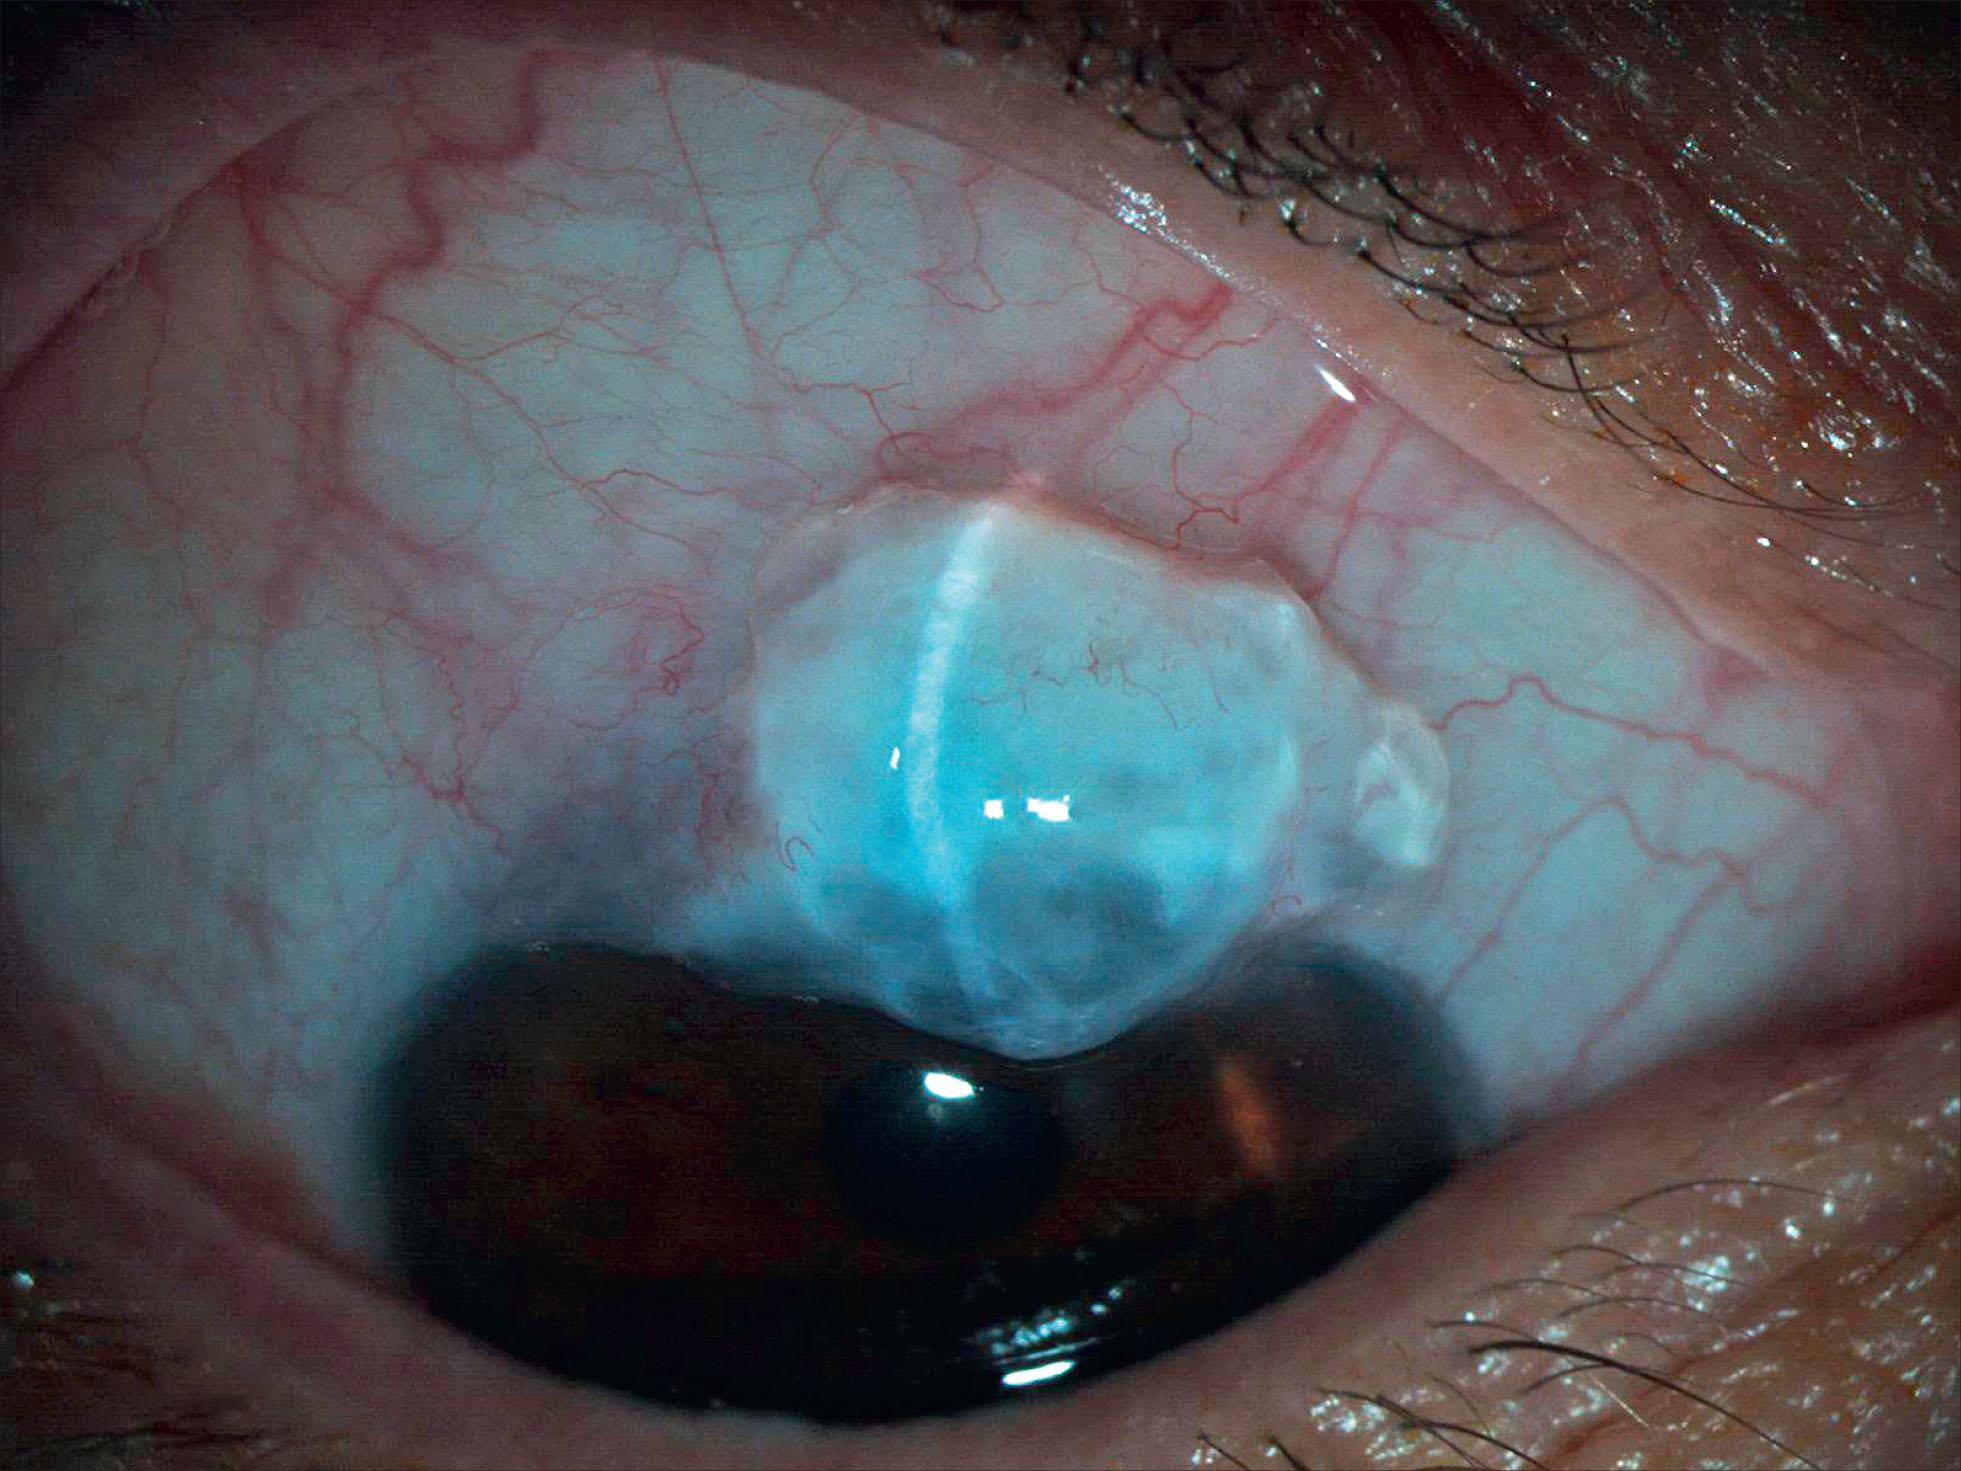 Fig. 10.27.3, Example of Localized, Cystic, Thin-Walled Bleb.